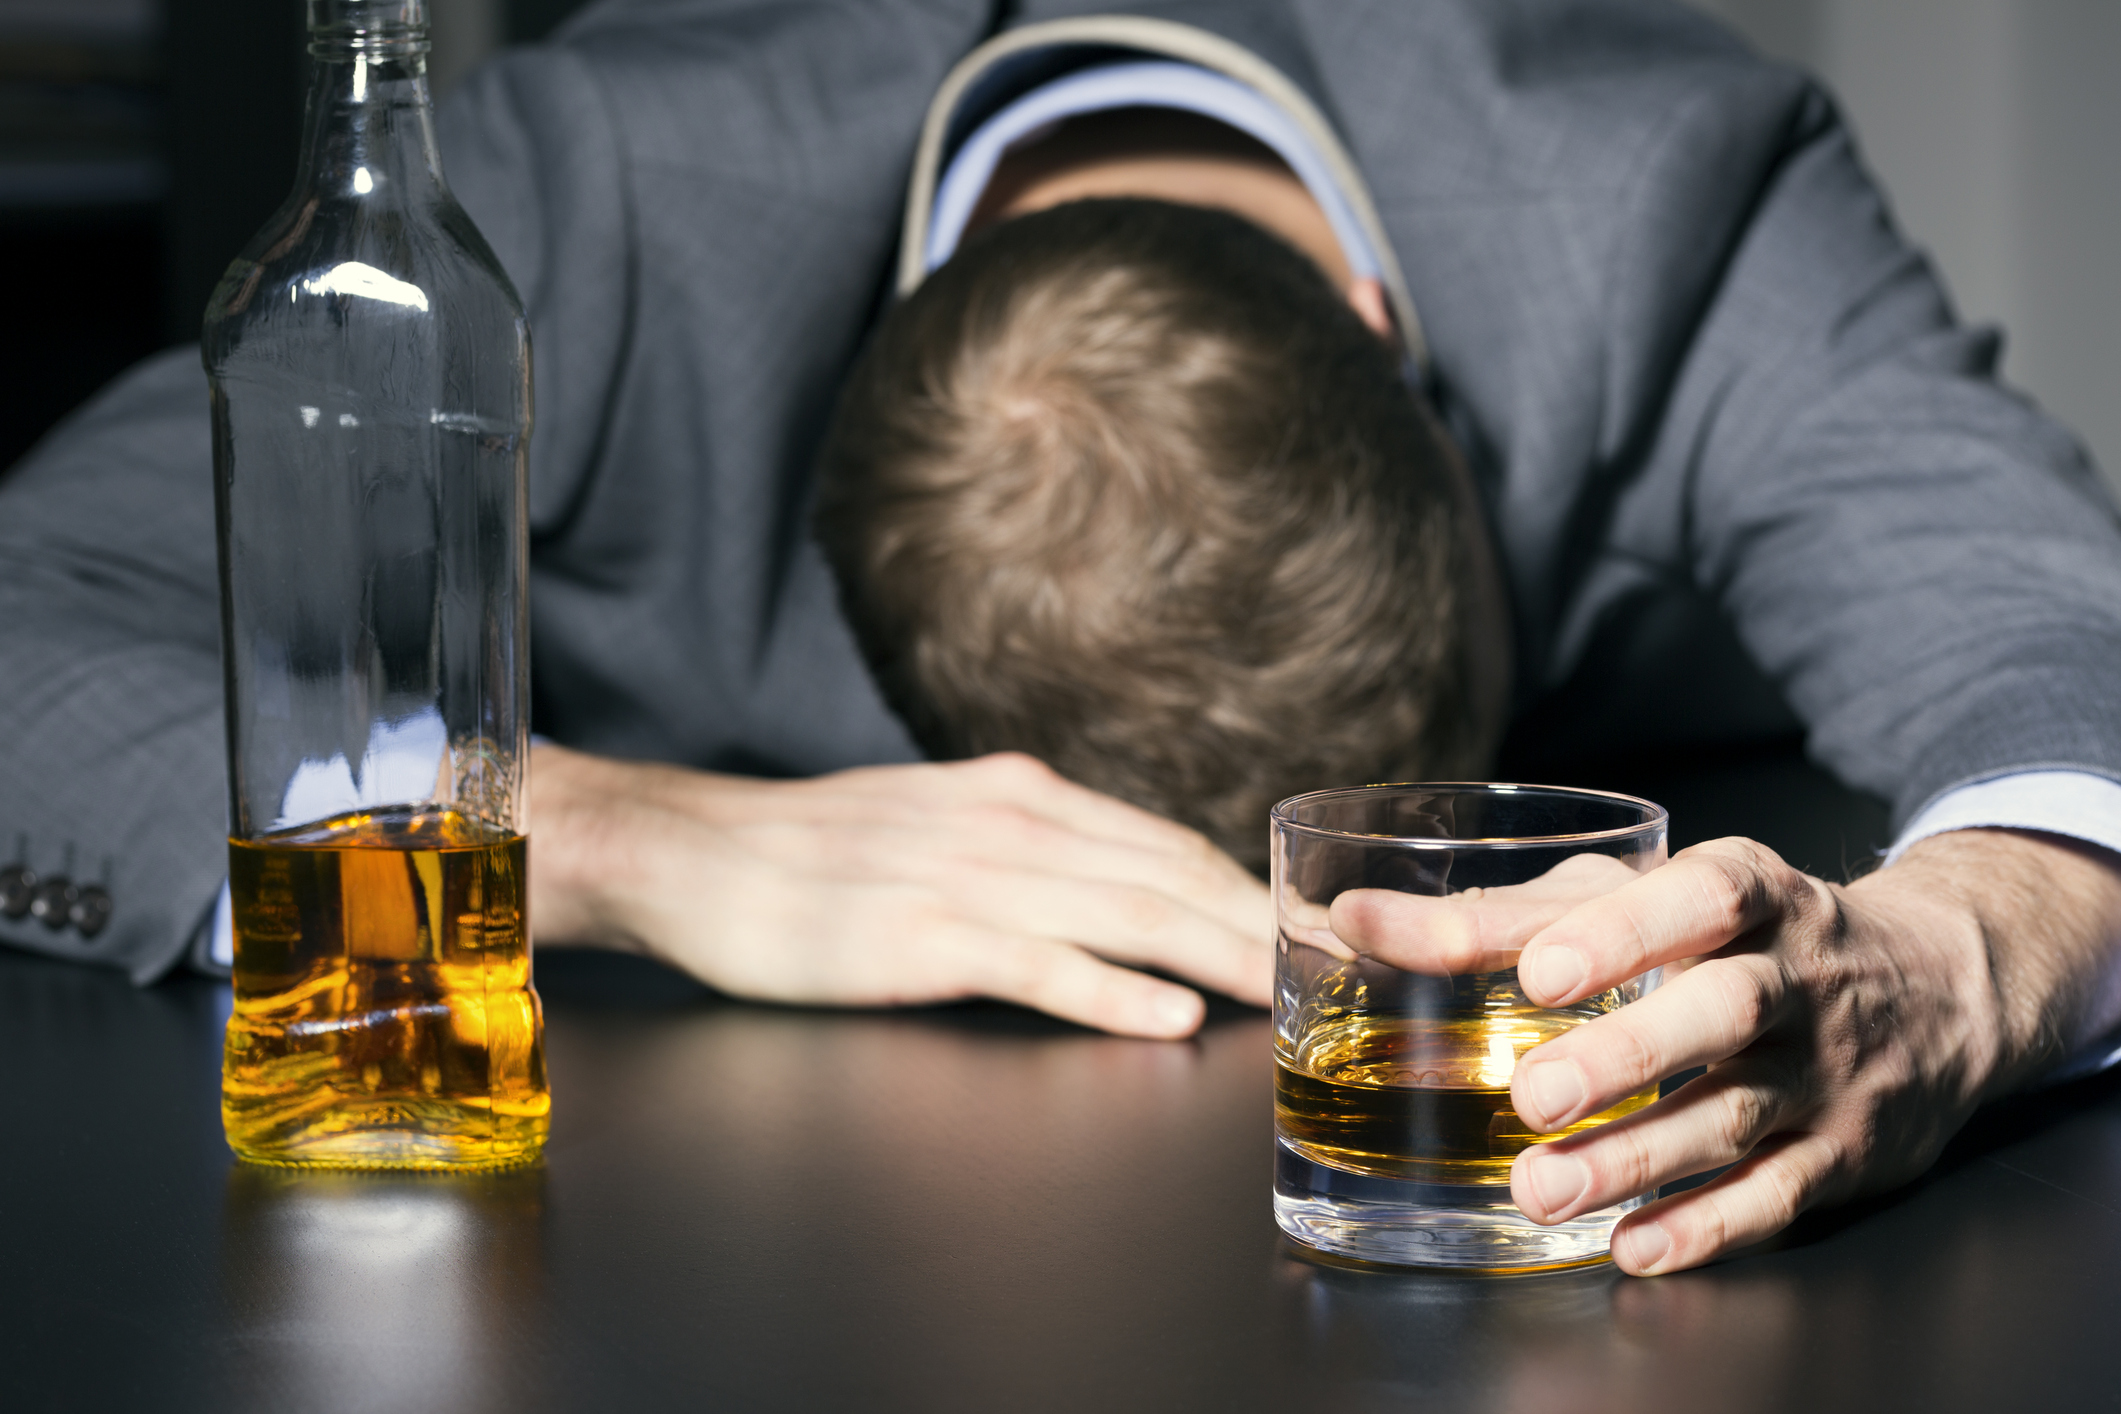 alcohol addiction - drunk businessman holding a glass of whiskey on the table